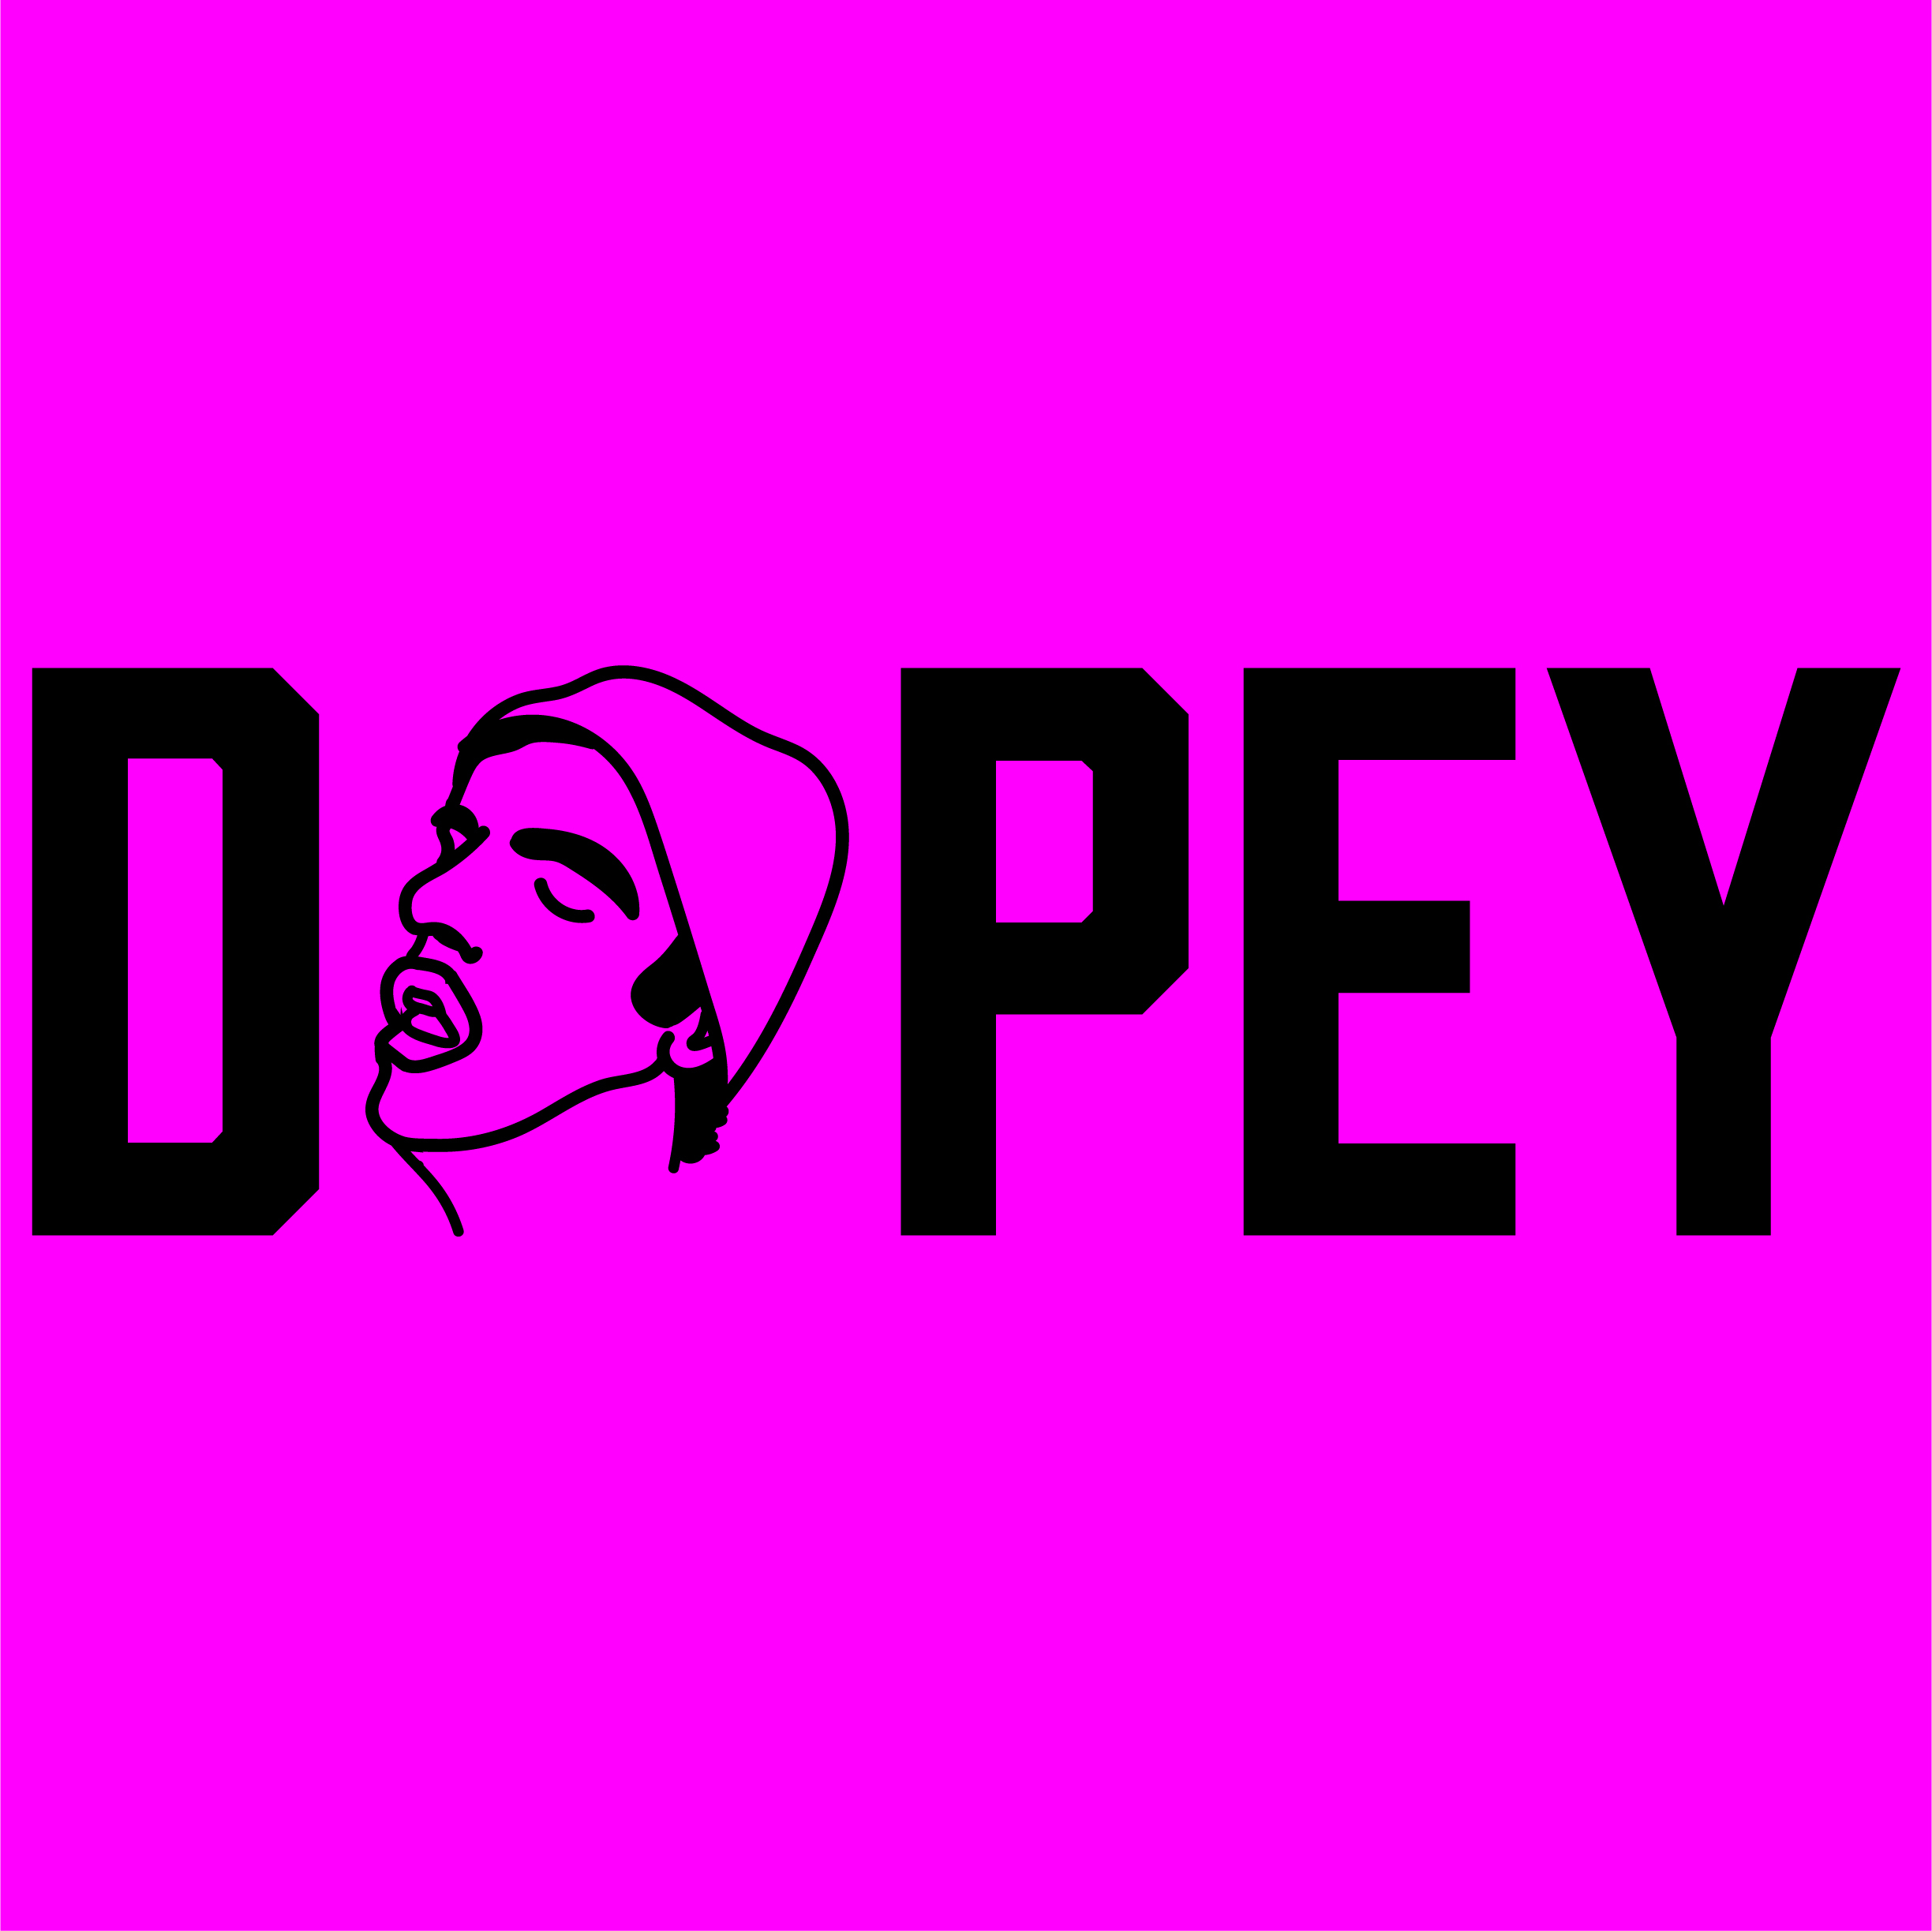 Dopey125: Dave’s Pilot, Fired on First Day of Work, Maegan and Bobby from Boston, Prison, Artie Lange Interactions, The Addictionary